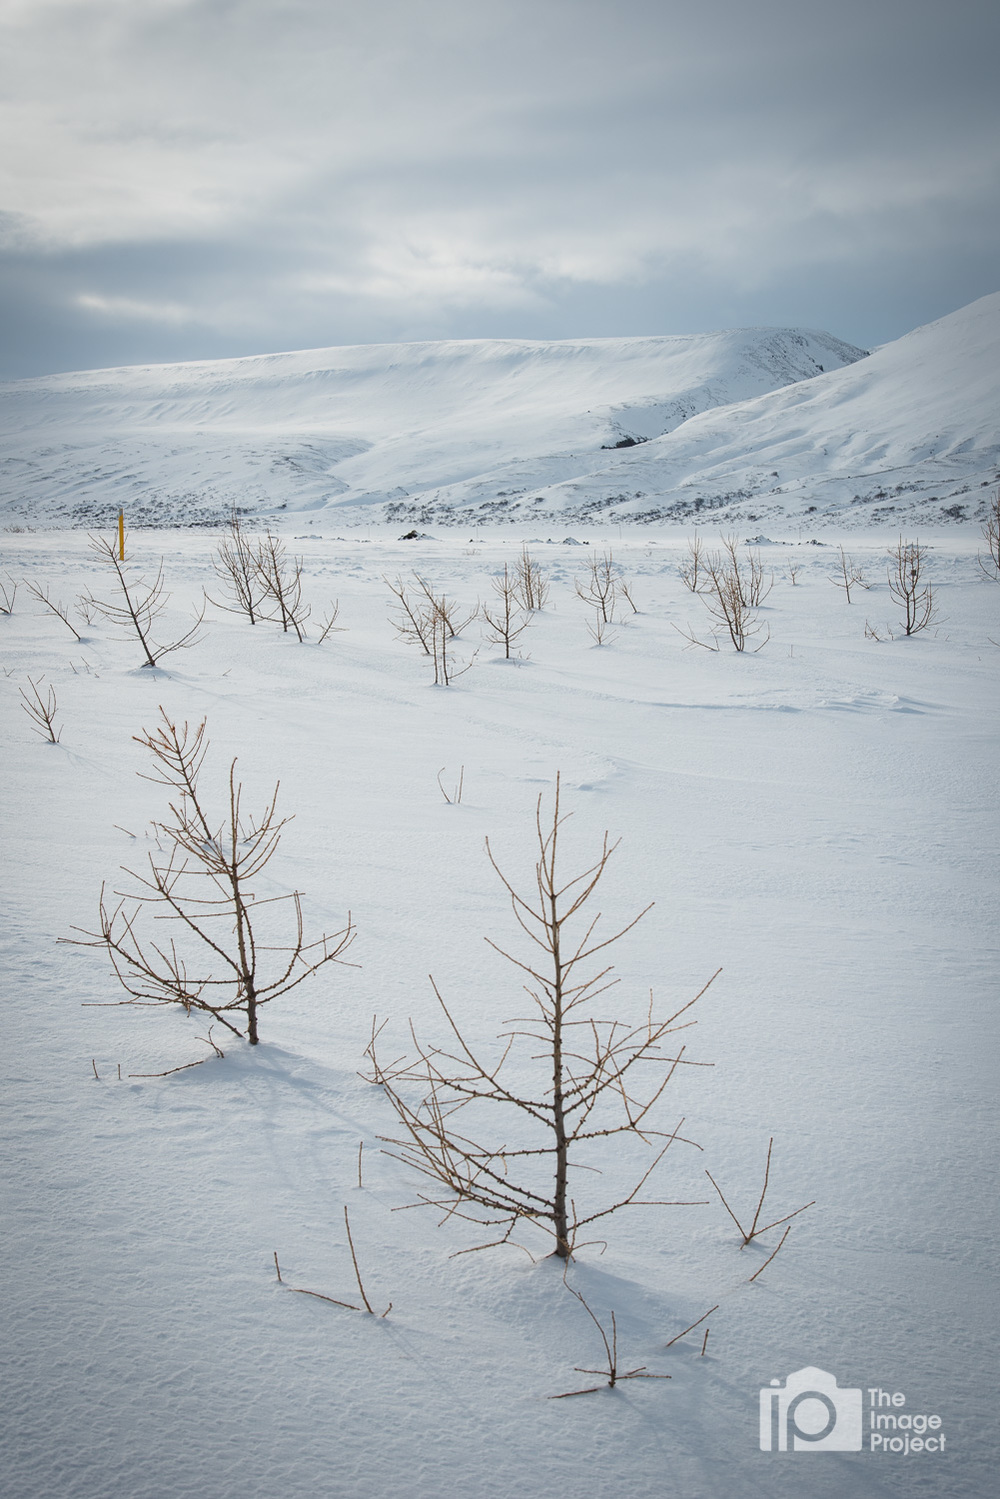 Sapling trees in frozen snowy winter landscape north iceland by nathan barry the image project